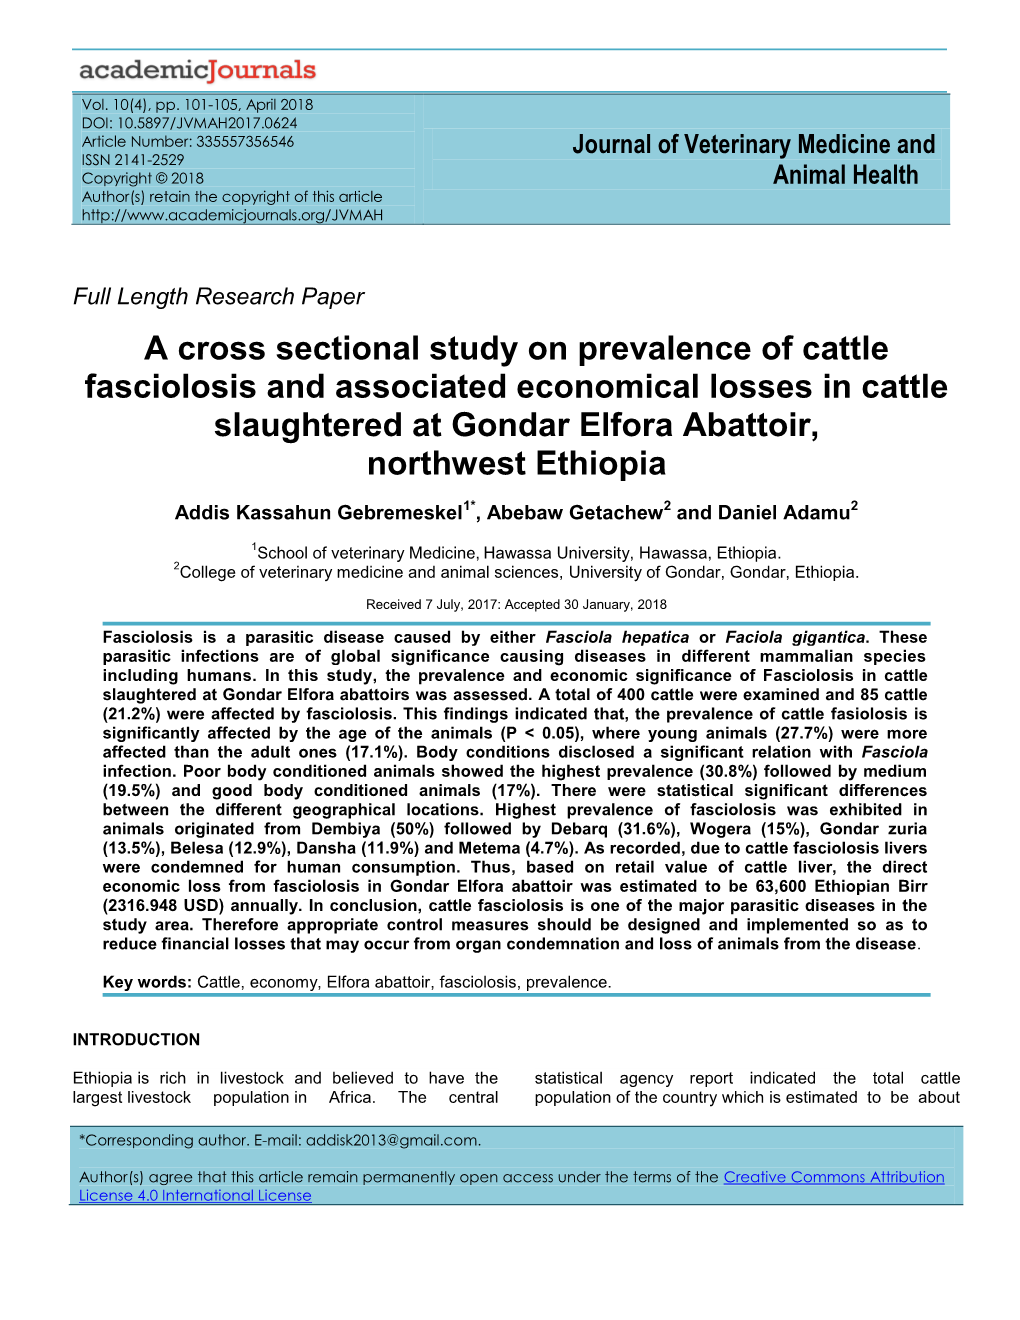 A Cross Sectional Study on Prevalence of Cattle Fasciolosis and Associated Economical Losses in Cattle Slaughtered at Gondar Elfora Abattoir, Northwest Ethiopia